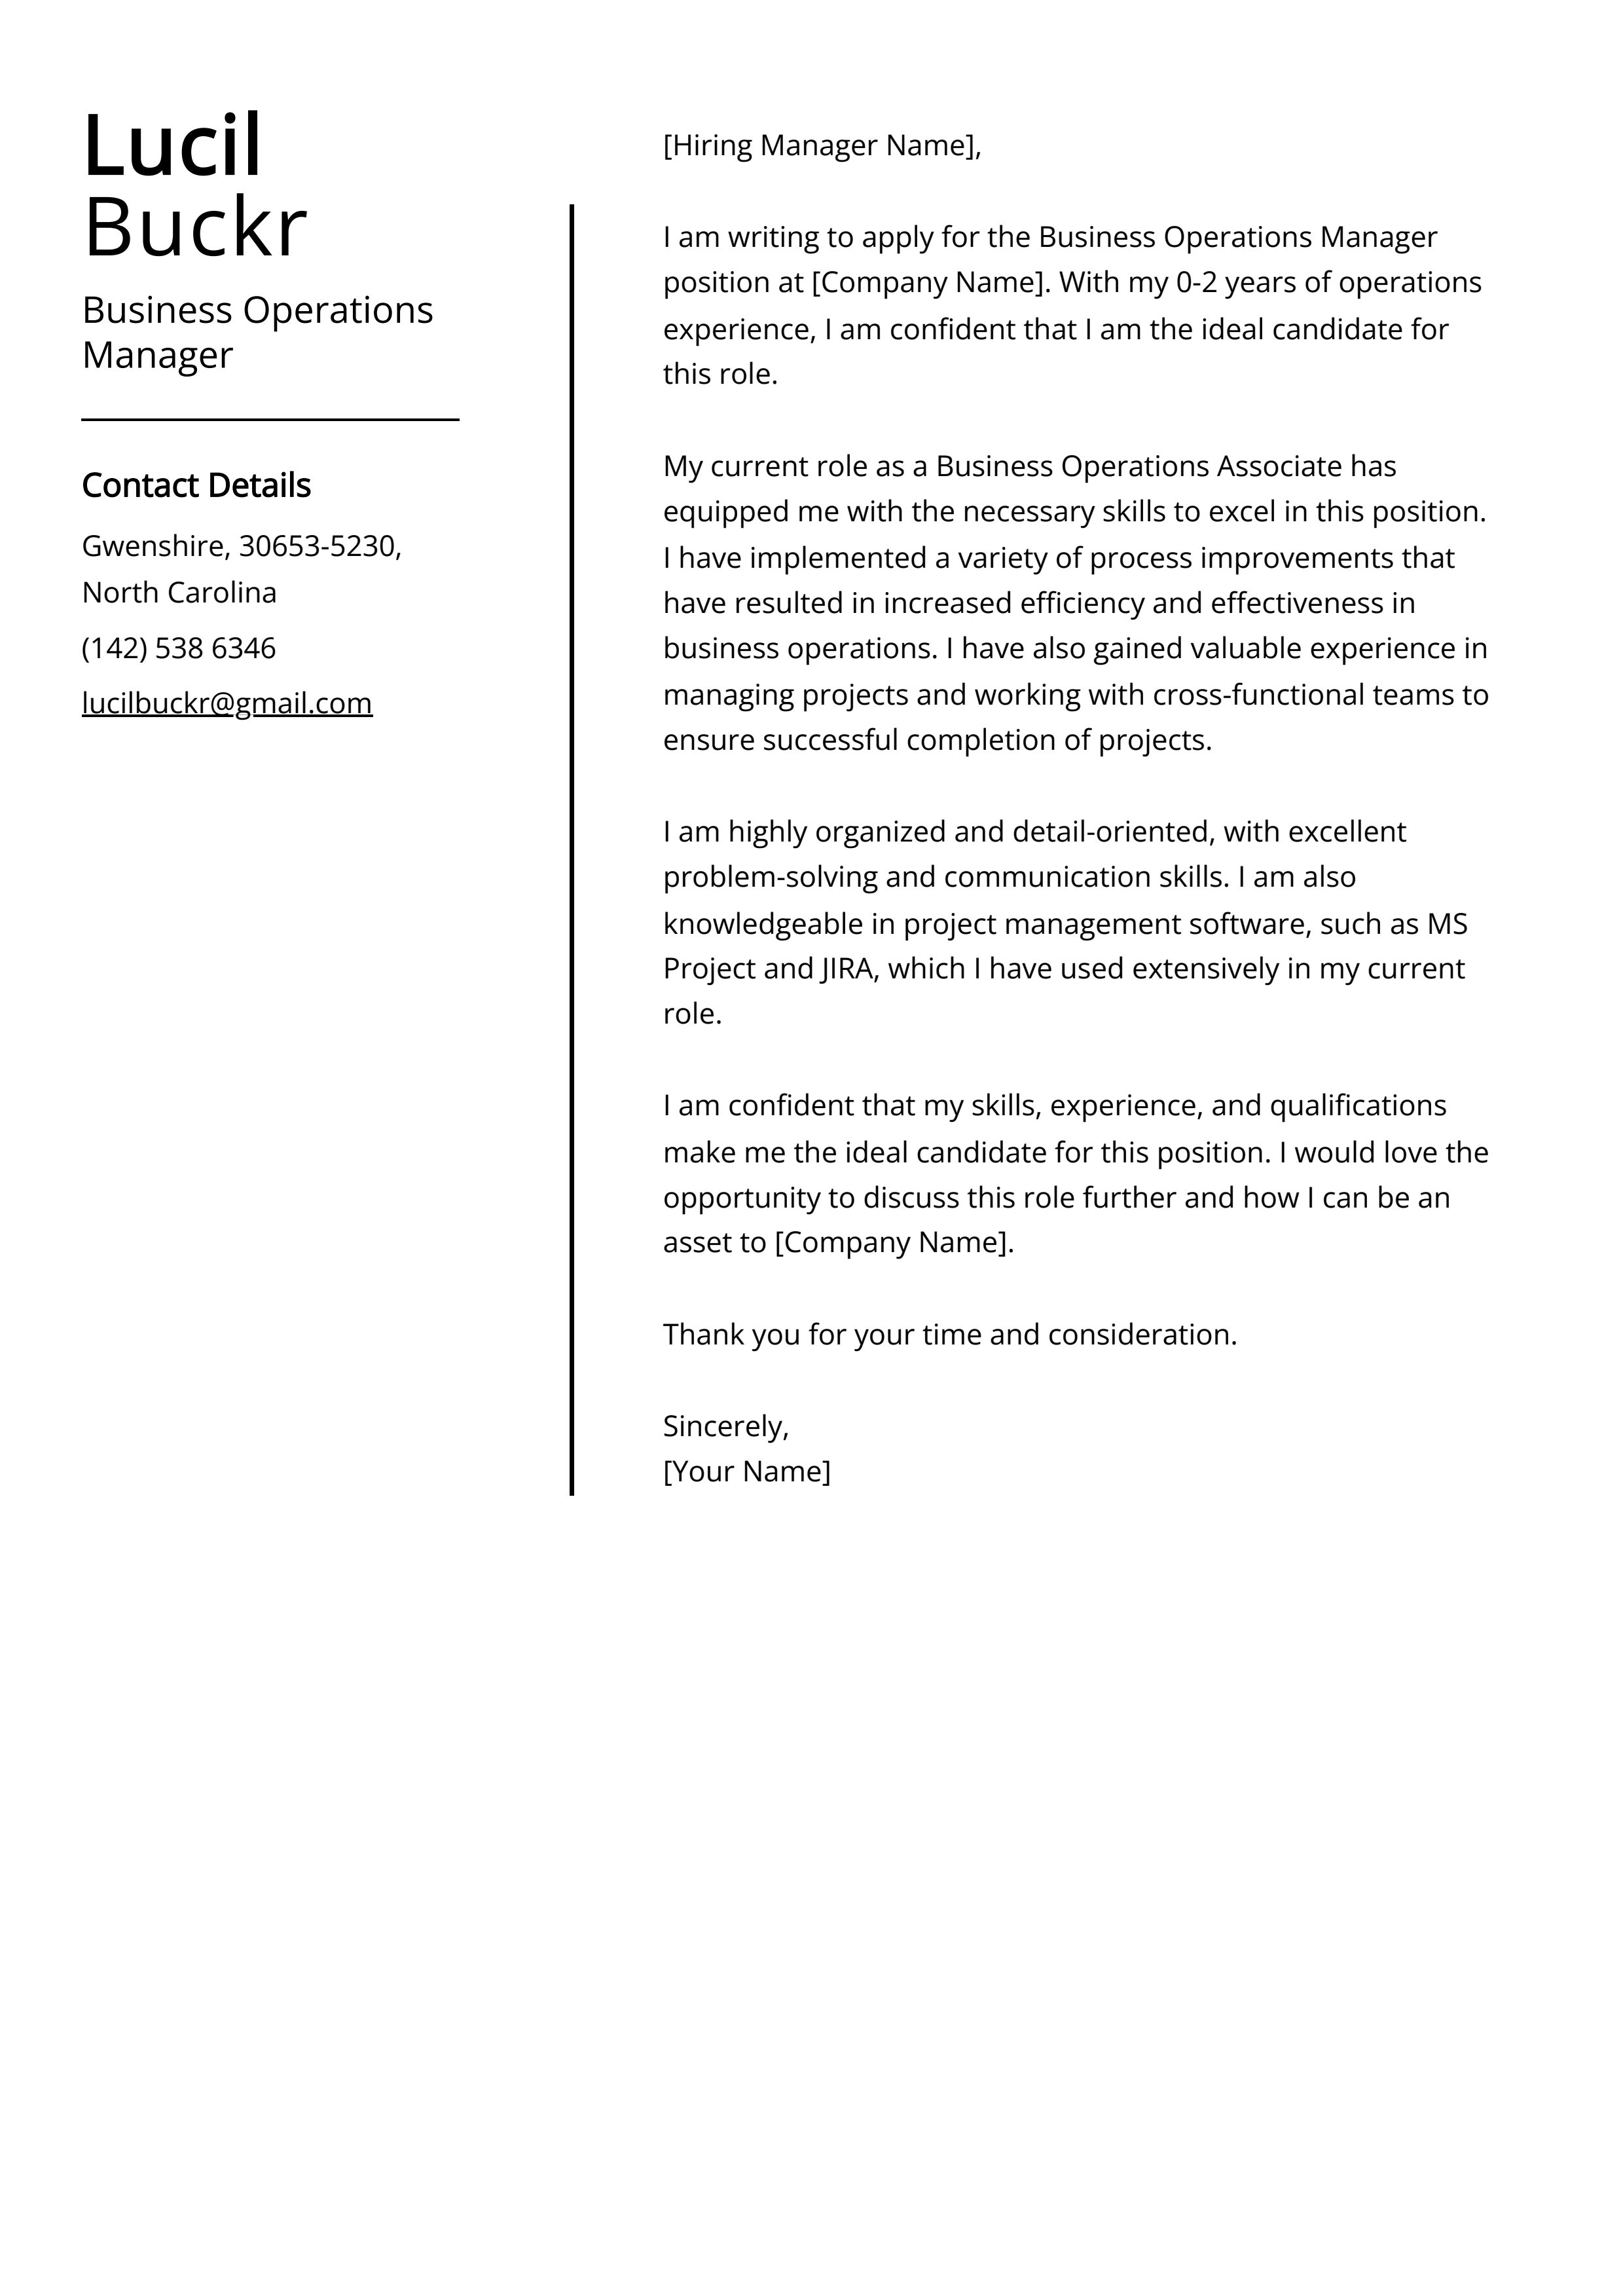 Business Operations Manager Cover Letter Example